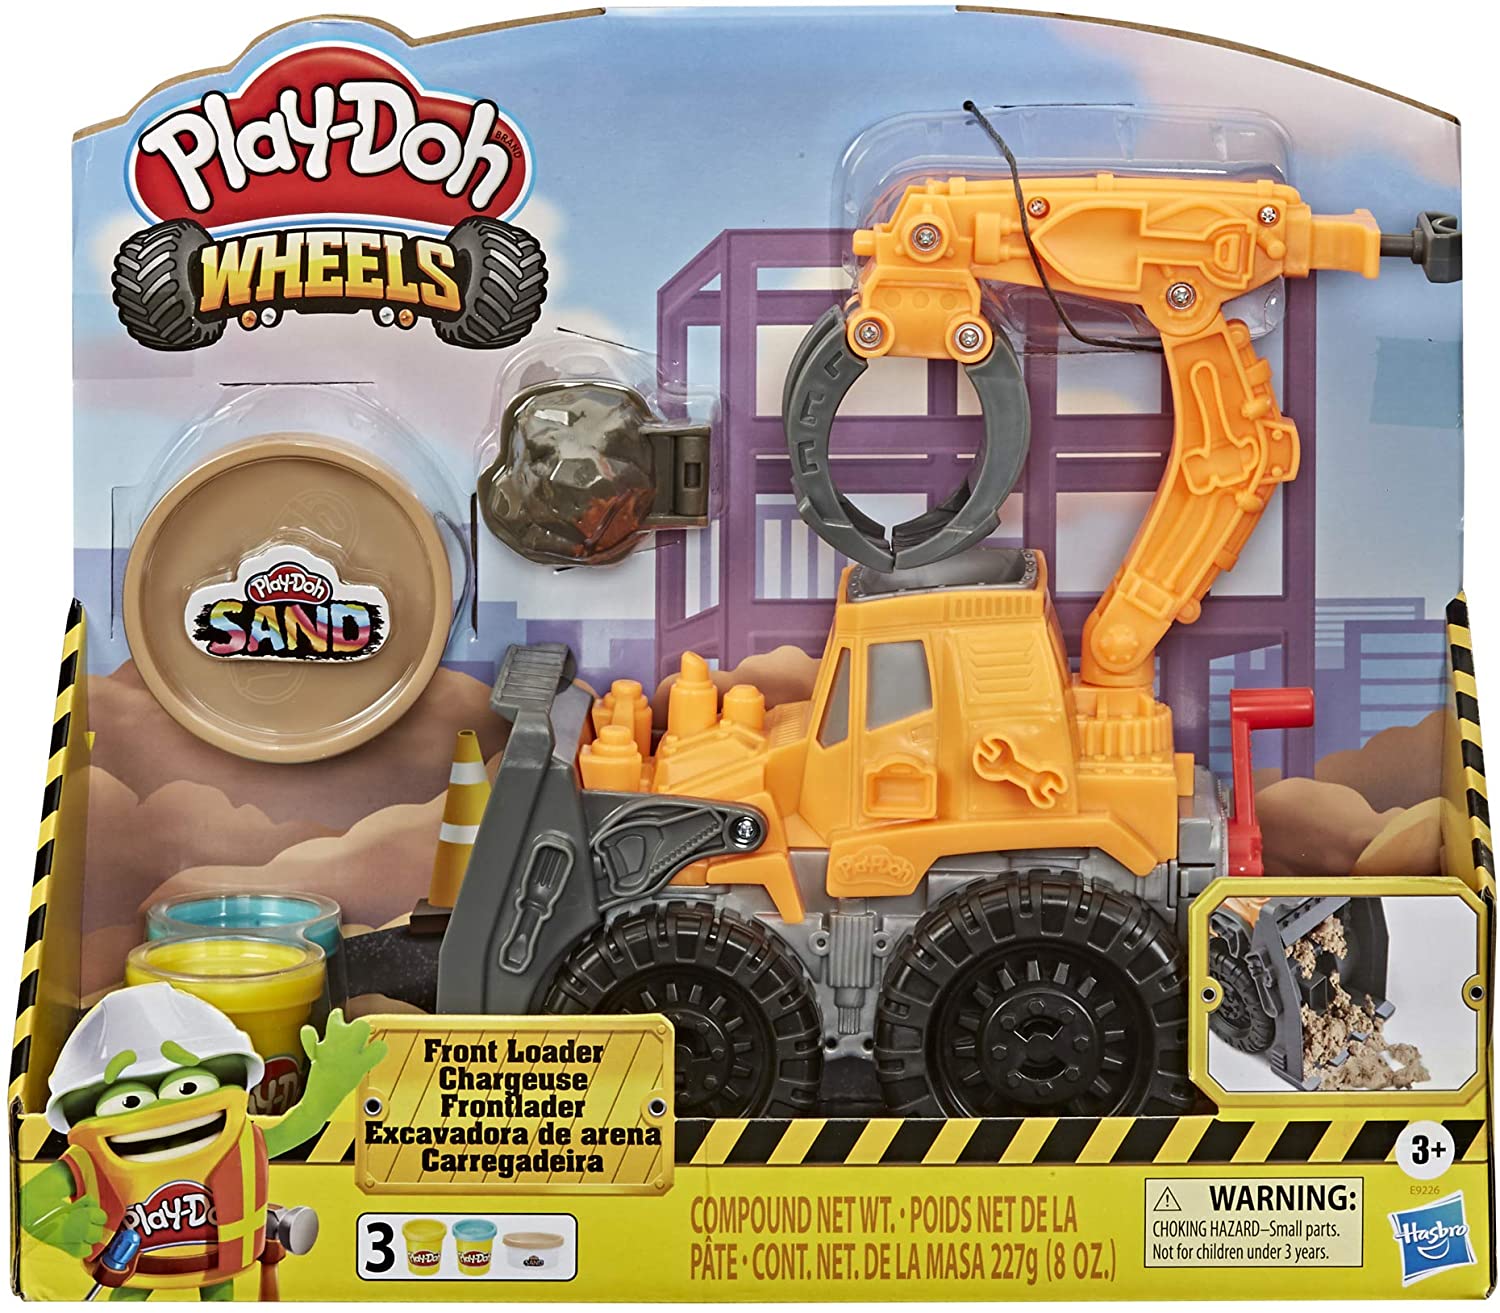 5-Piece Play-Doh Wheels Front Loader Toy Truck Set $9.10 + Free Shipping w/ Prime or on $25+